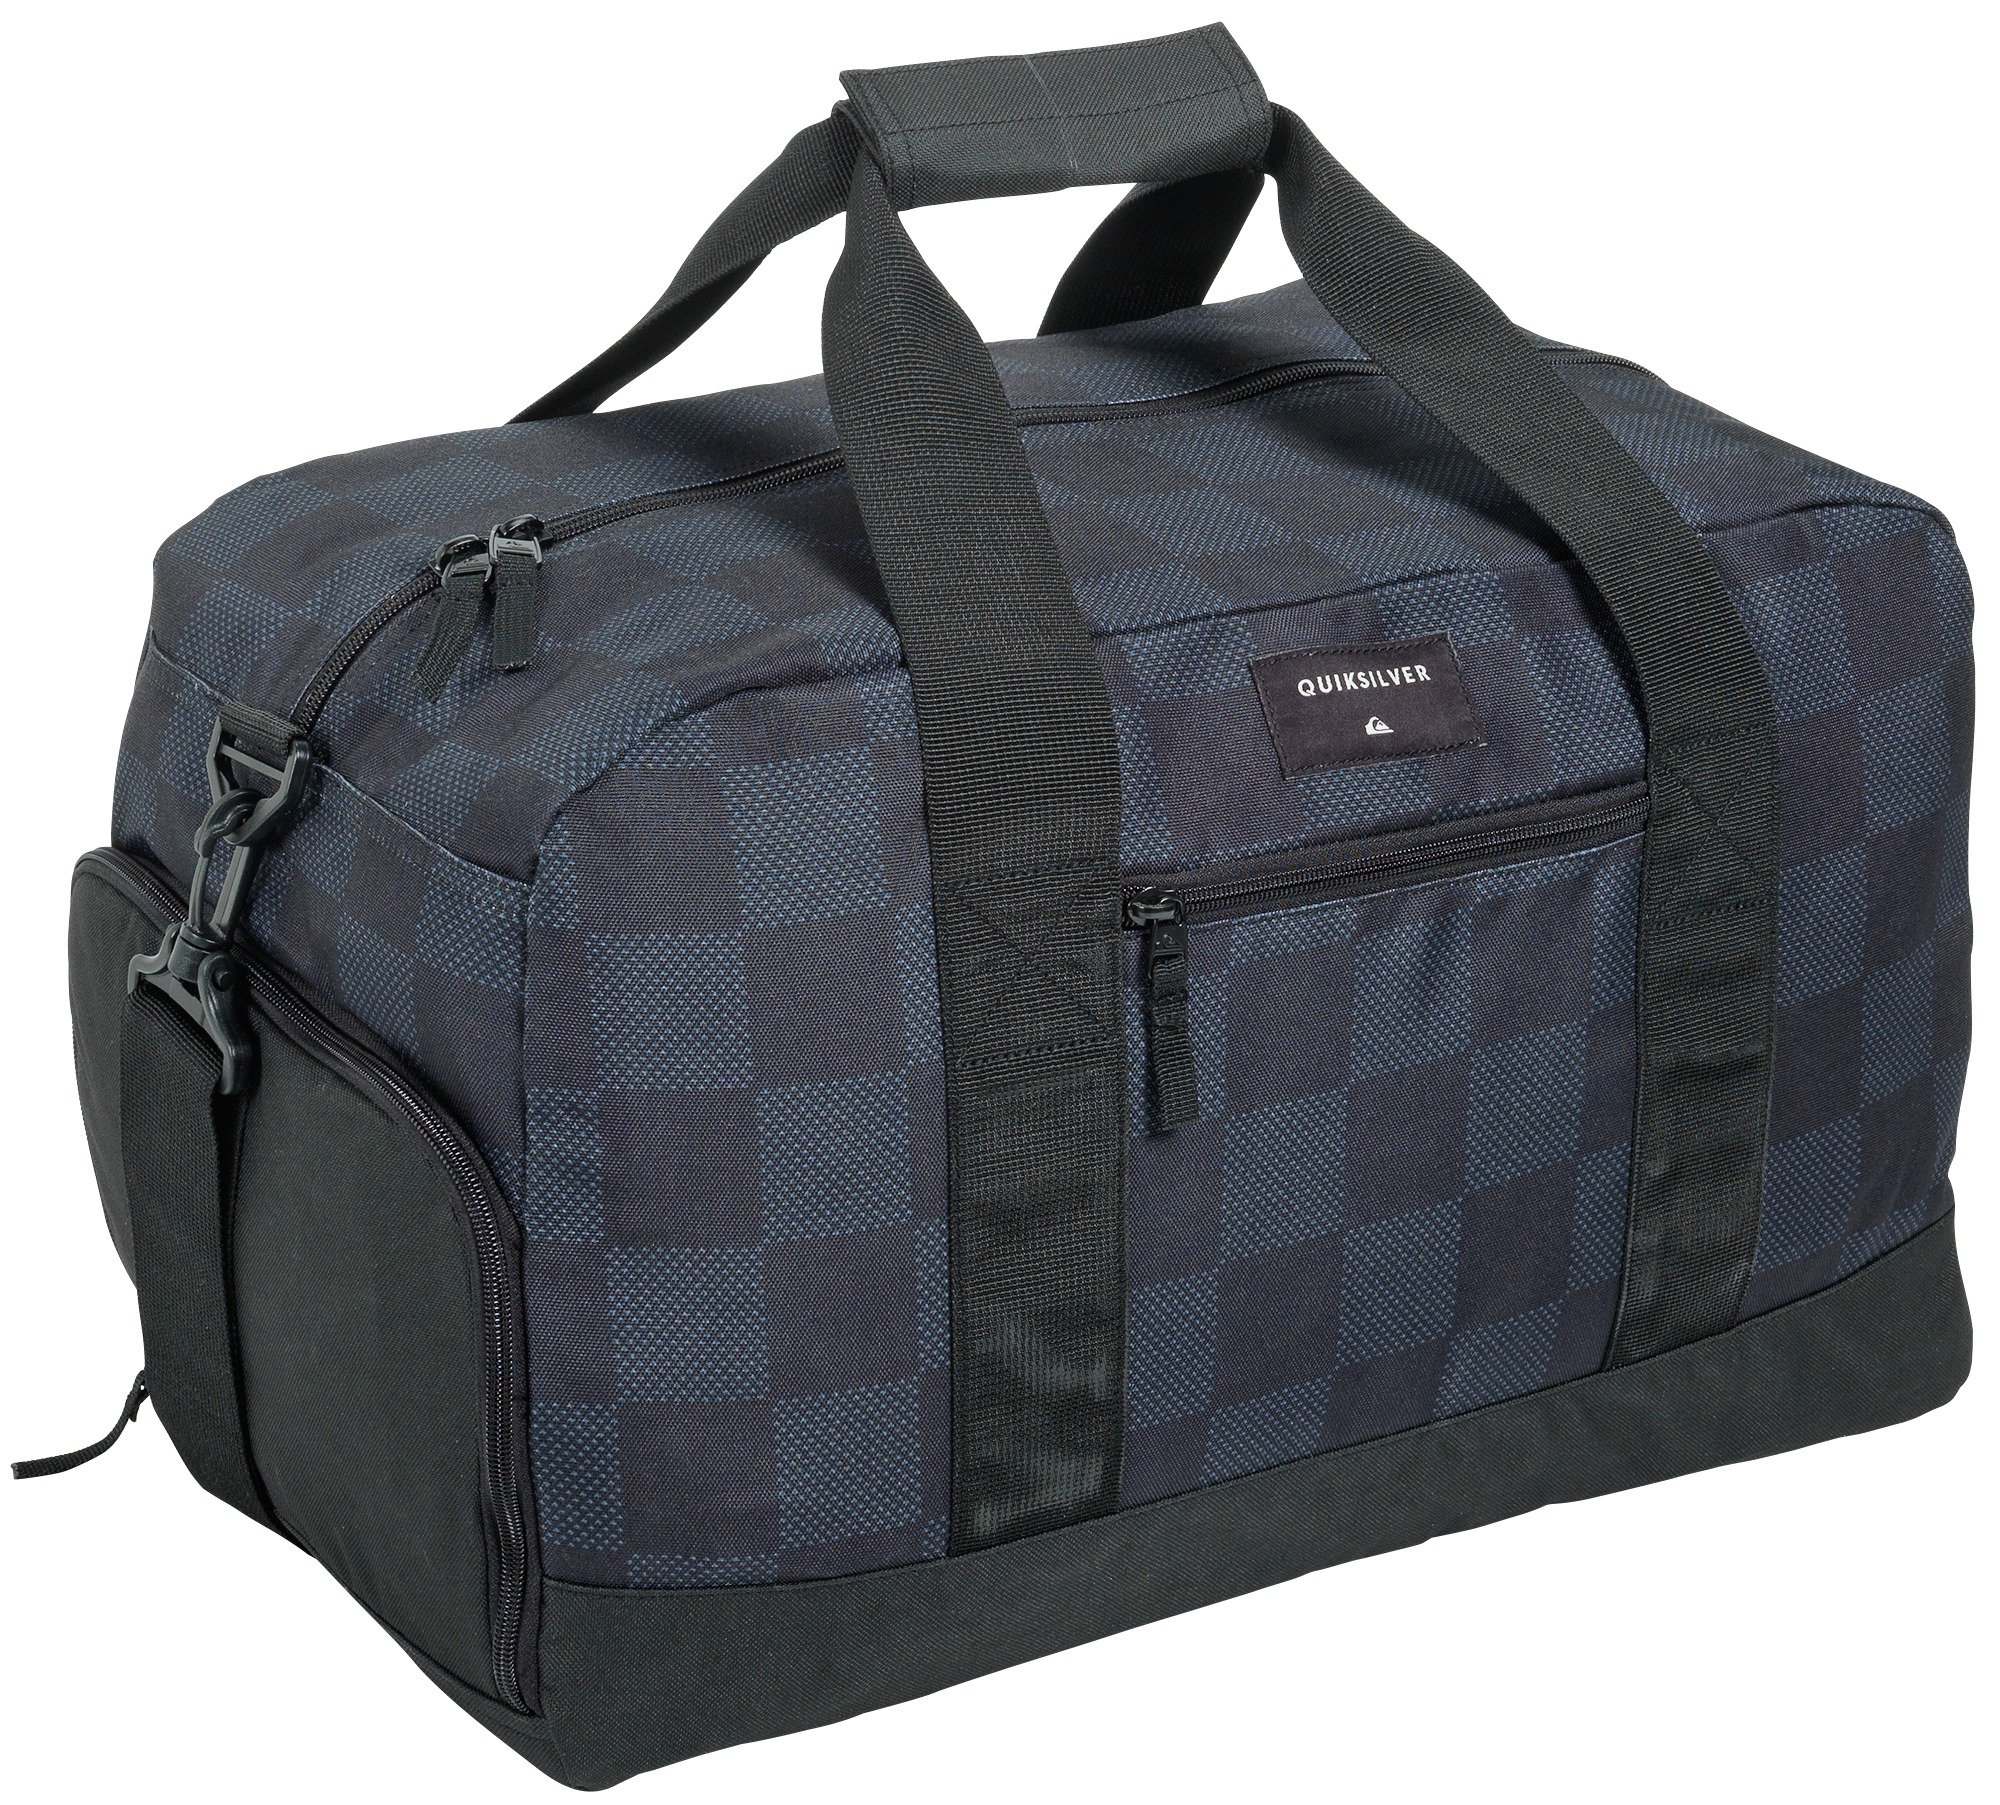 Quiksilver Check Holdall Bag - Medium. Review